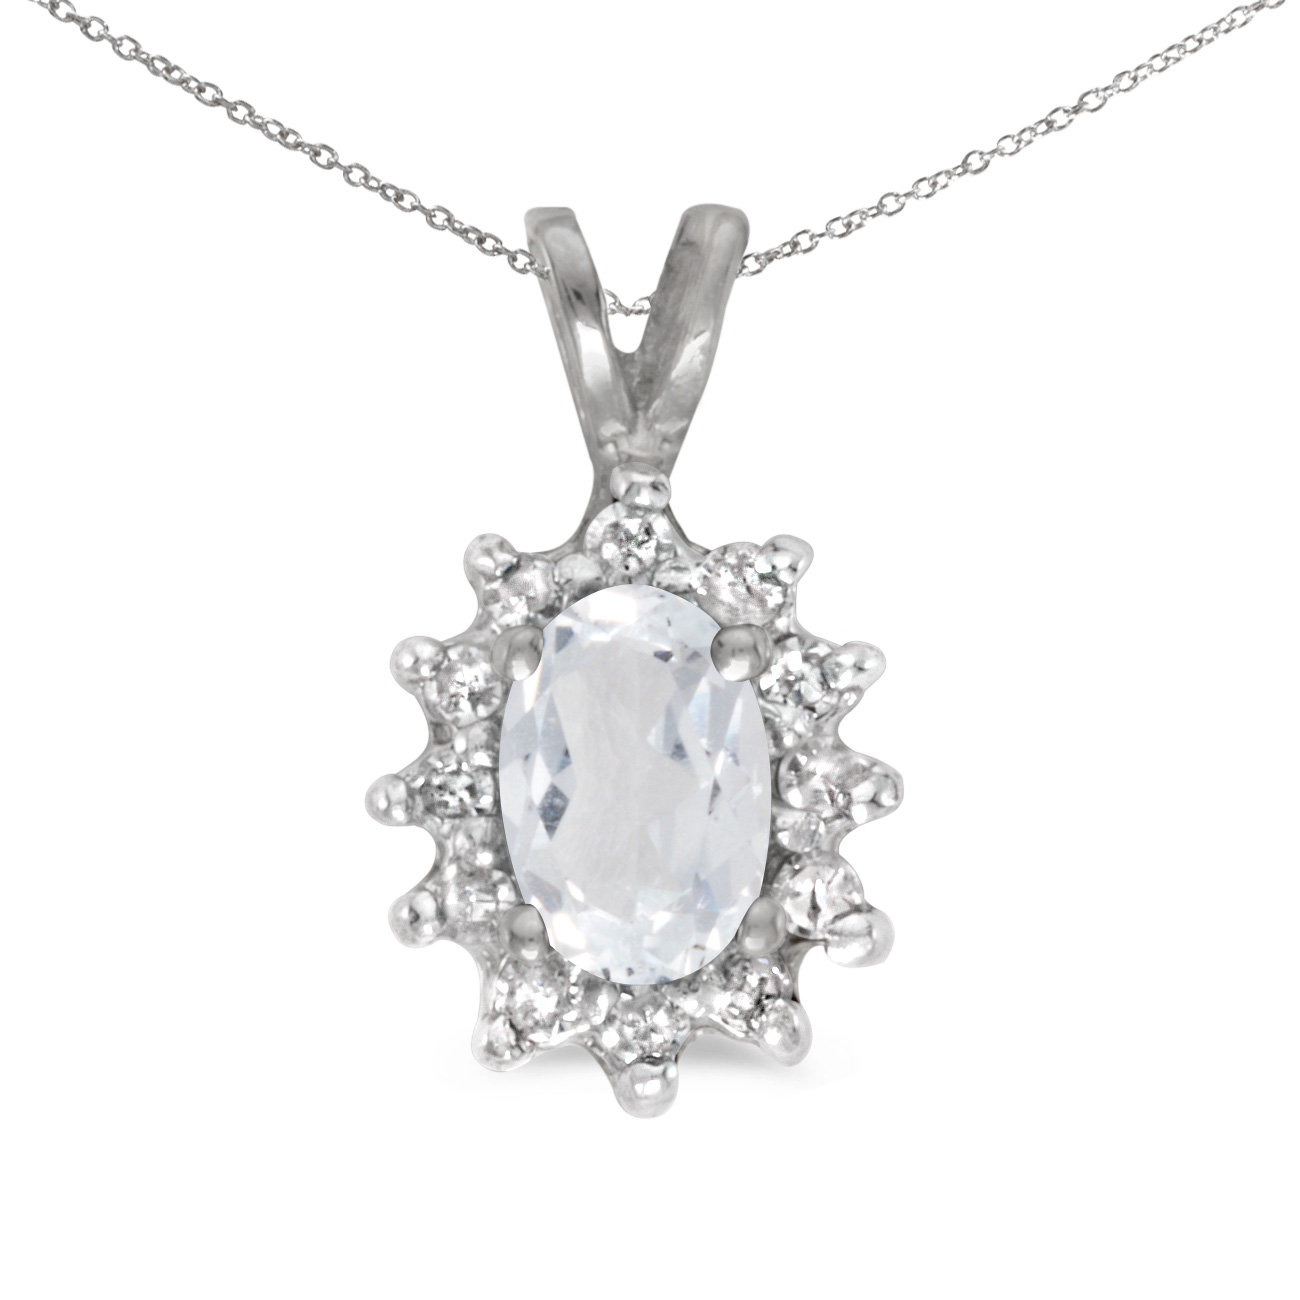 JCX2746: This 14k white gold oval white topaz and diamond pendant features a 6x4 mm genuine natural white topaz with a 0.48 ct total weight.